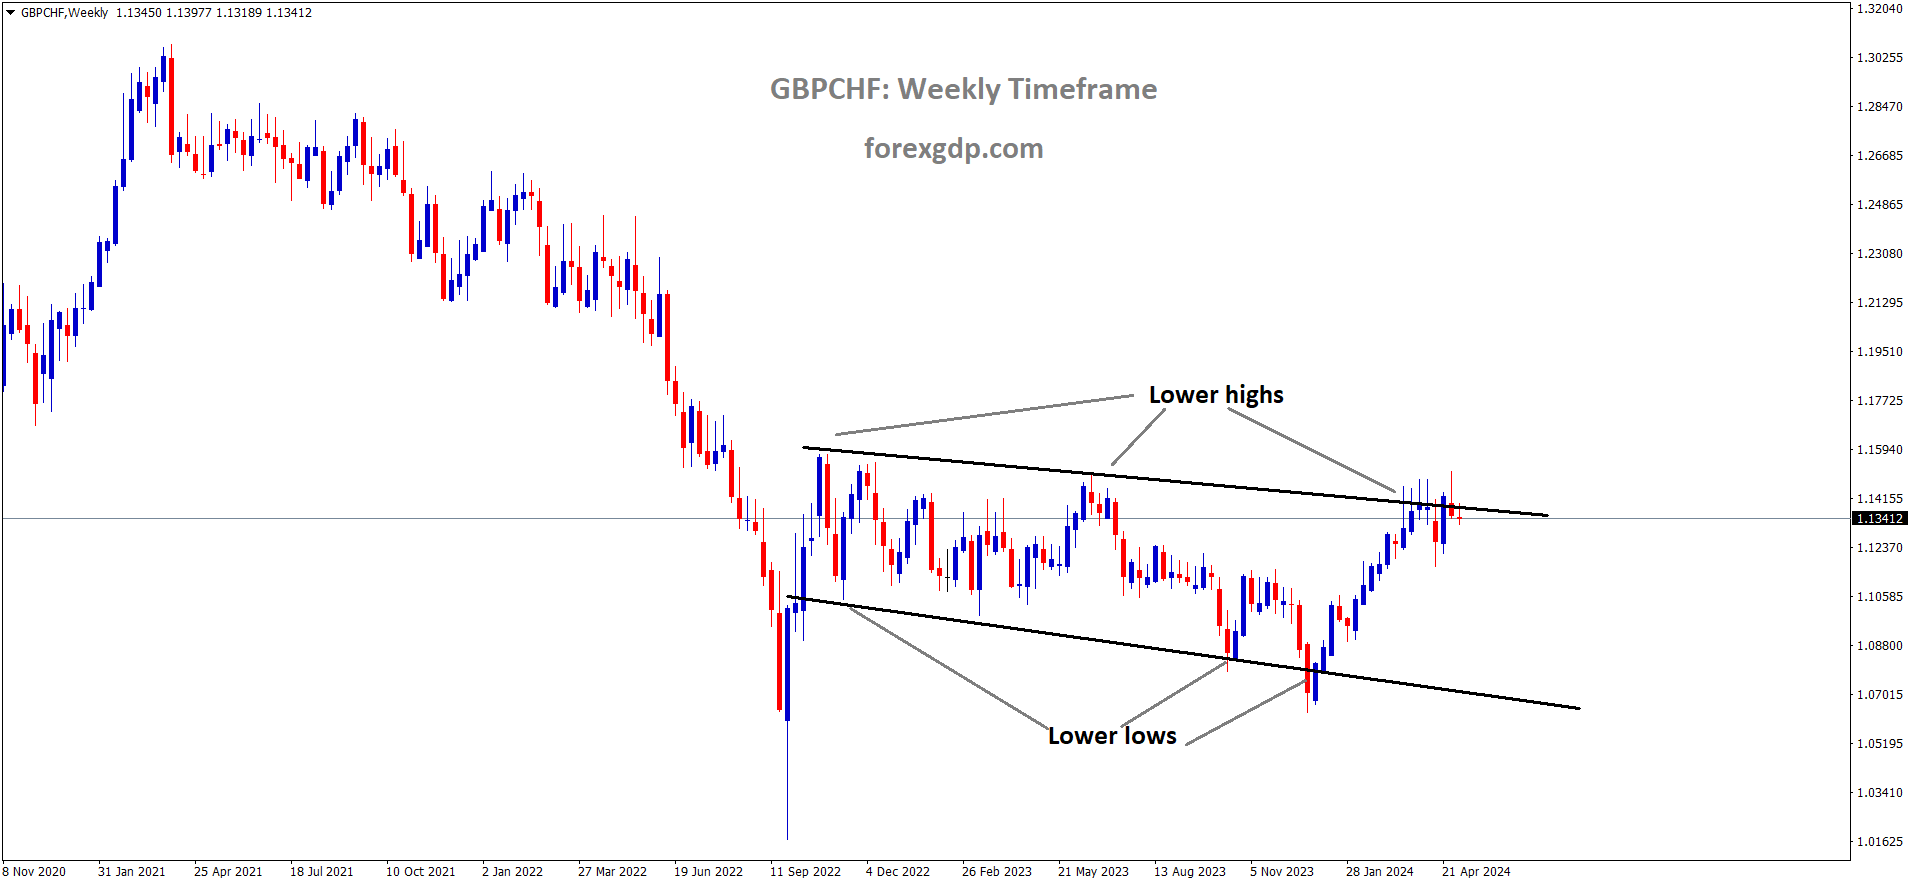 GBPCHF is moving in Descending channel and market has reached lower high area of the channel